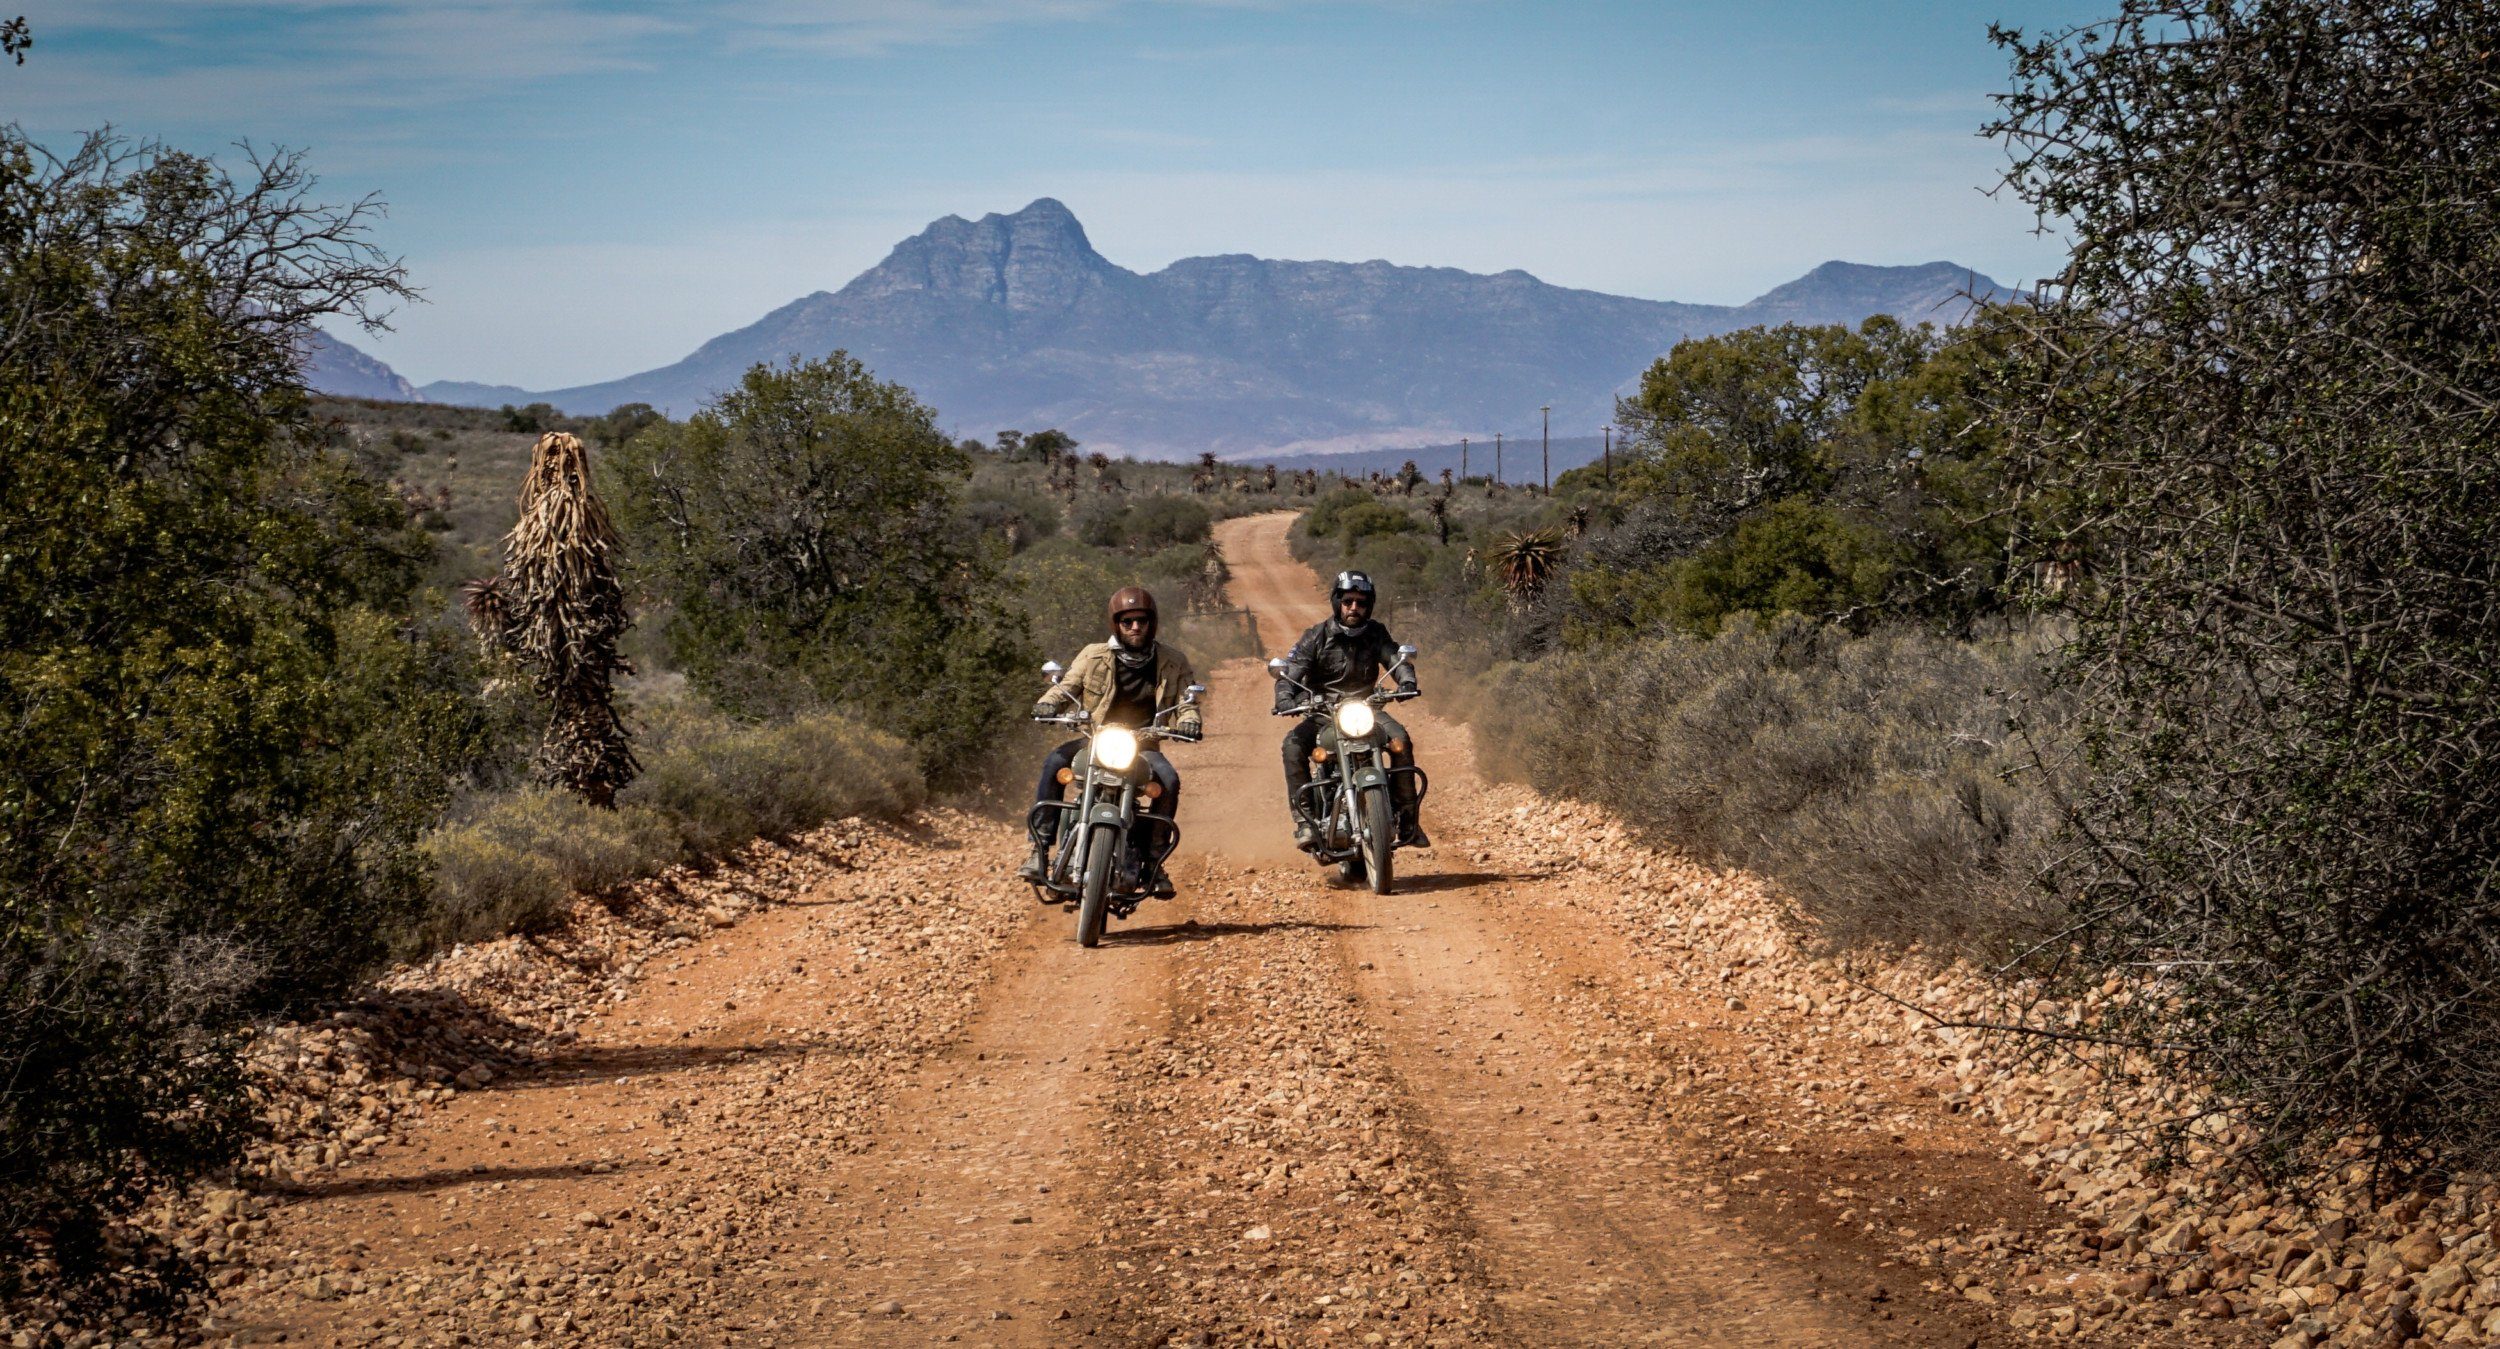 Motorcycle road trip South Africa - South Africa: The Wild Escape